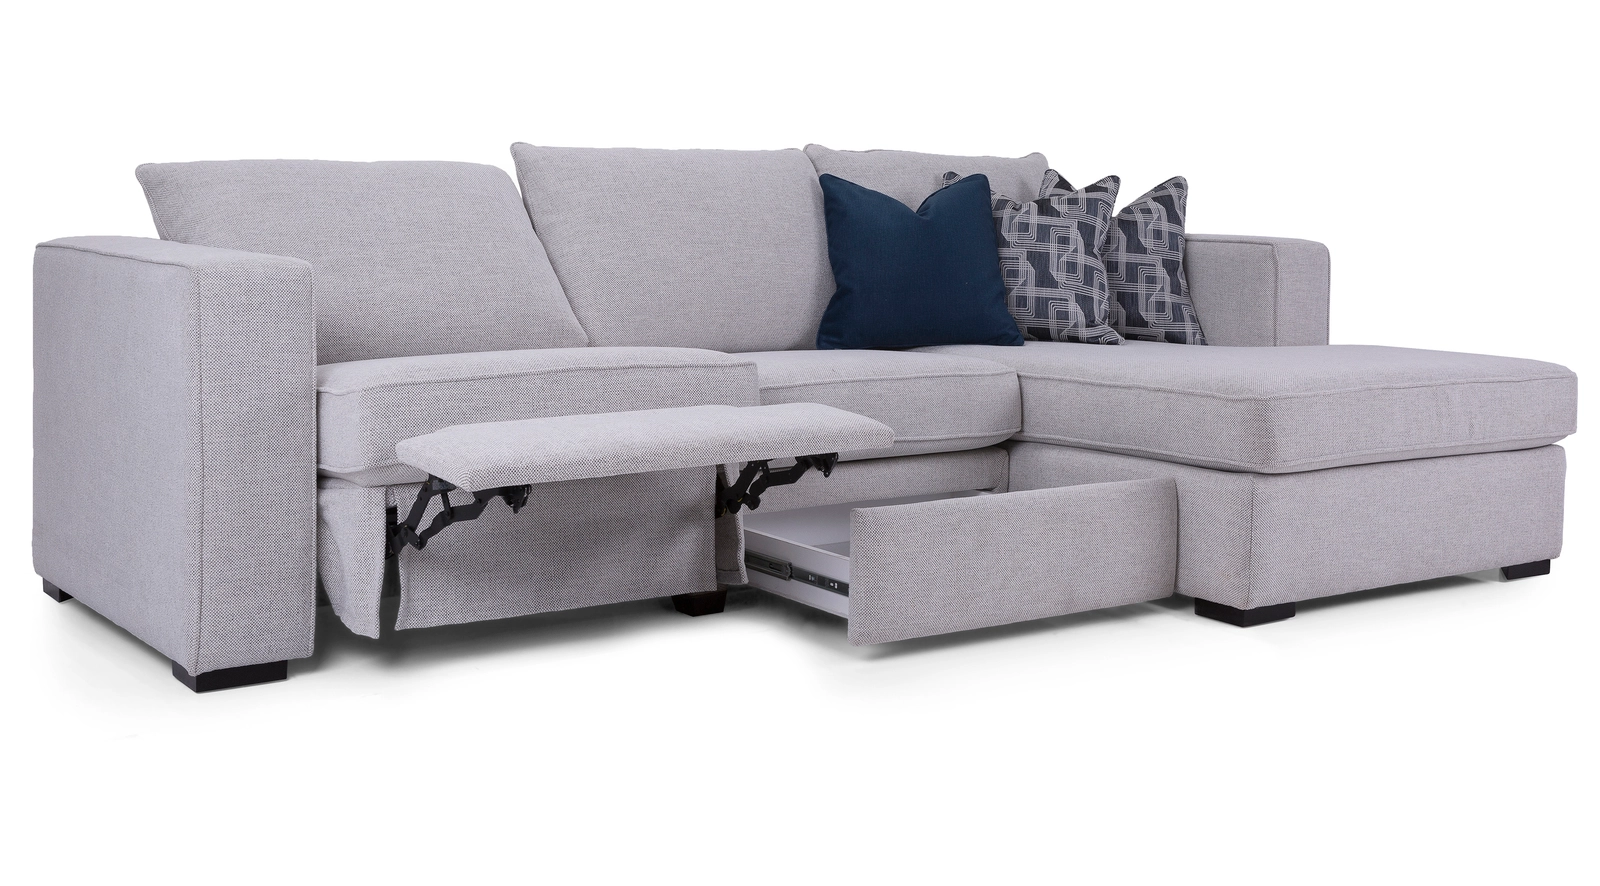 Online Canadian Furniture pick from Decor-Rest. A grey sectional sofa with custom options